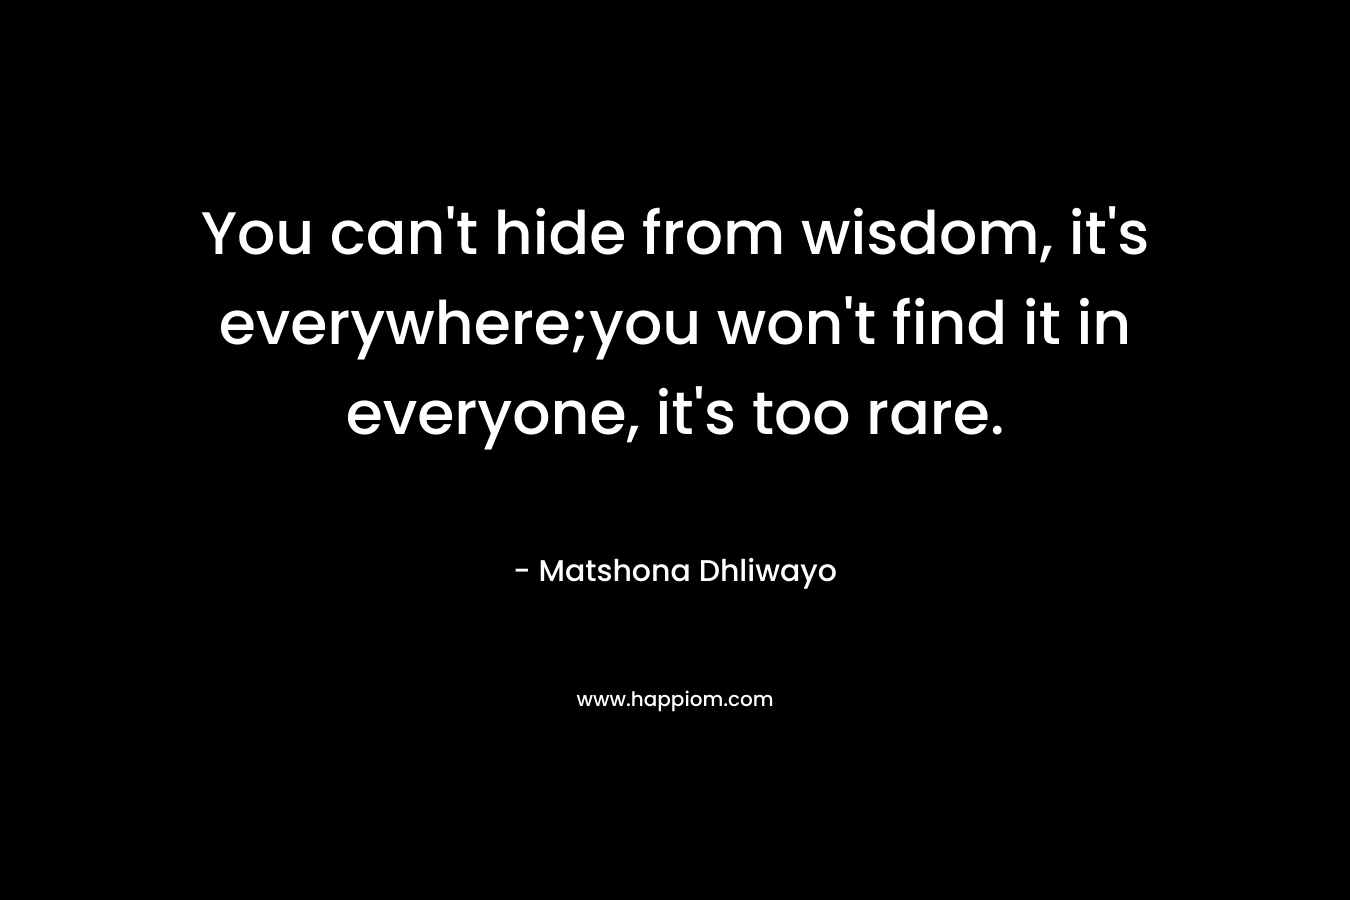 You can’t hide from wisdom, it’s everywhere;you won’t find it in everyone, it’s too rare. – Matshona Dhliwayo